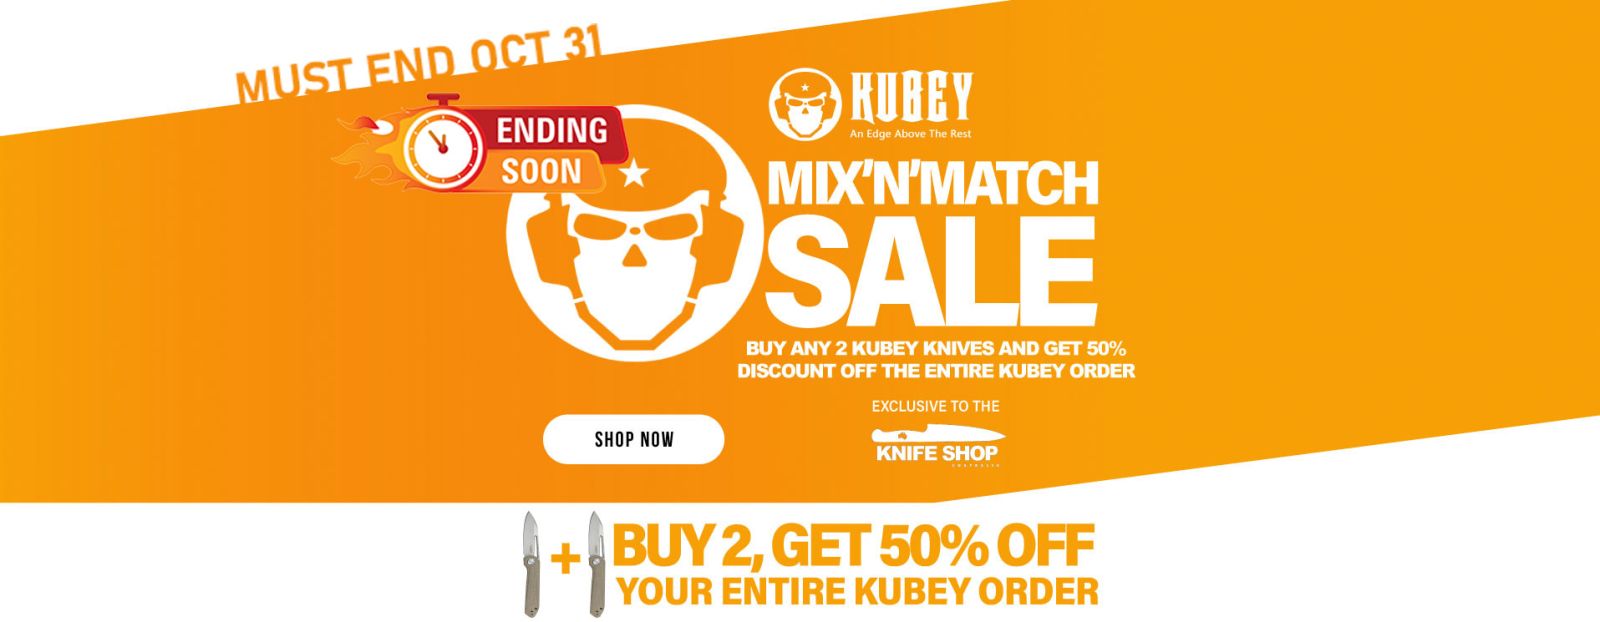 Kubey Mix'n'Match Sale 50% Off your entire Kubey order when you buy more than one Kubey Knife